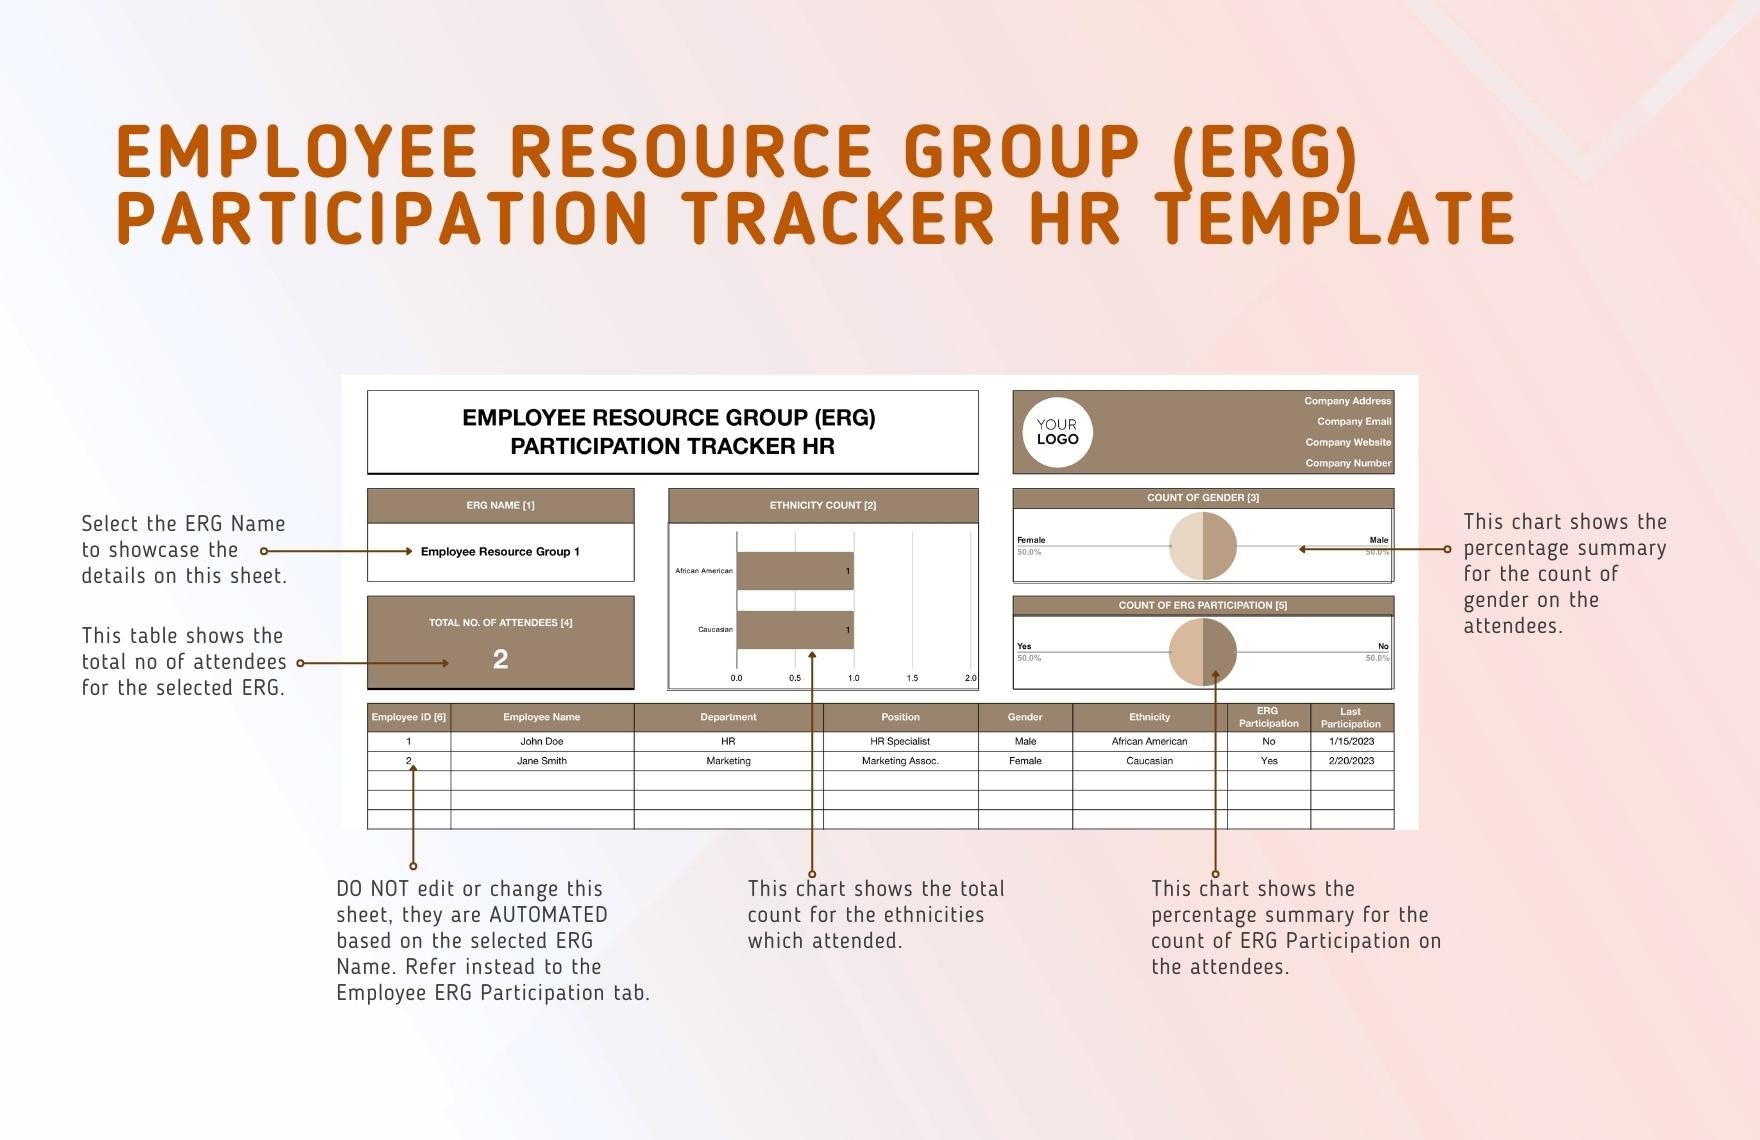 Employee Resource Group (ERG) Participation Tracker HR Template